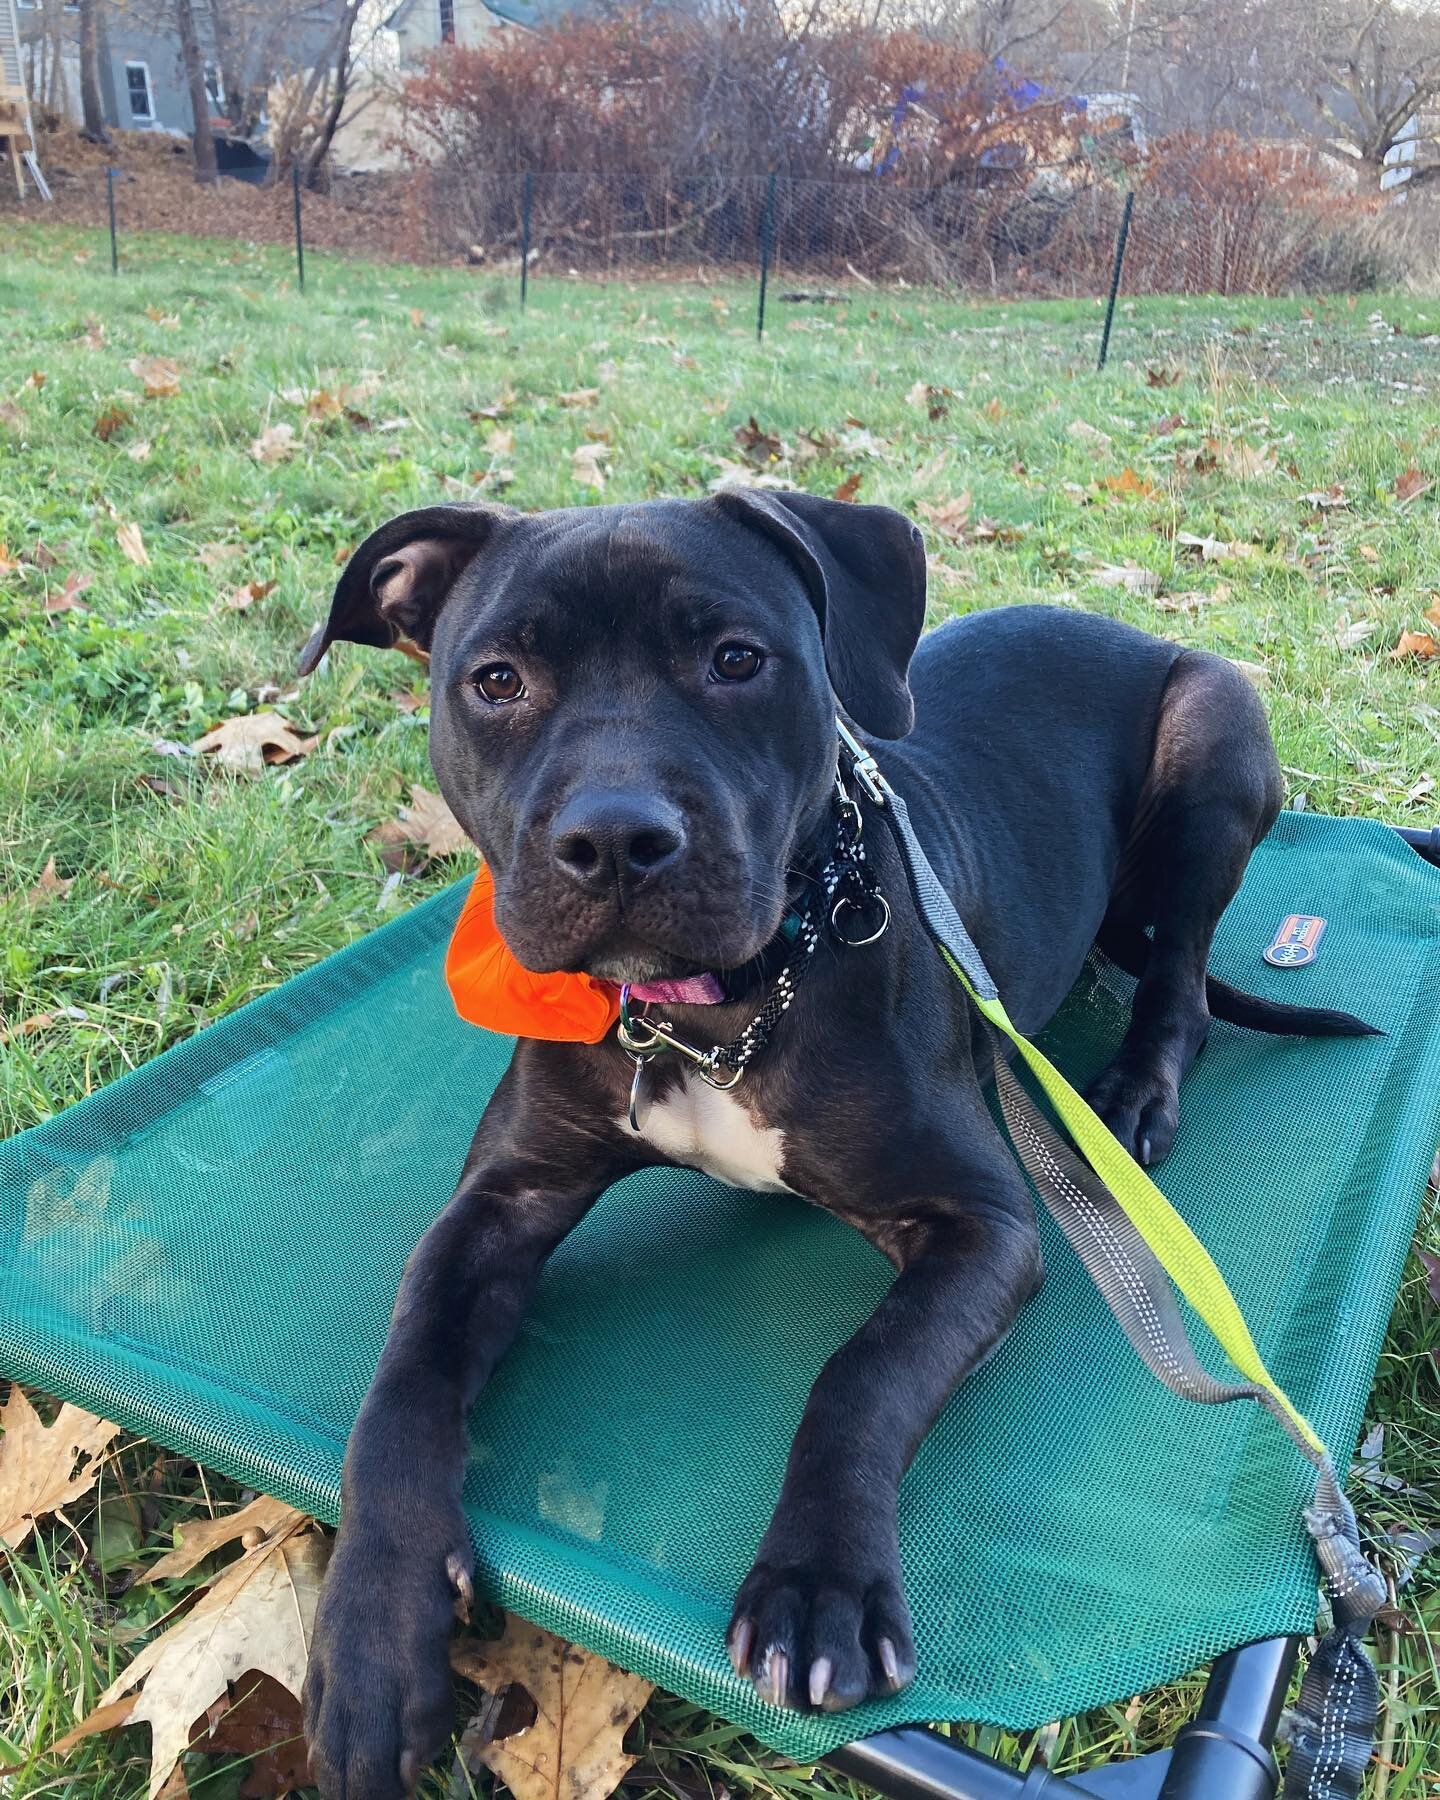 Say hi to our client Willow the 10 month-old pittie mix! Willow is doing our Basic Manners program to develop skills like loose-leash walking, practicing calmness even when she feels excited, and keeping all four paws on the ground when saying hi to 